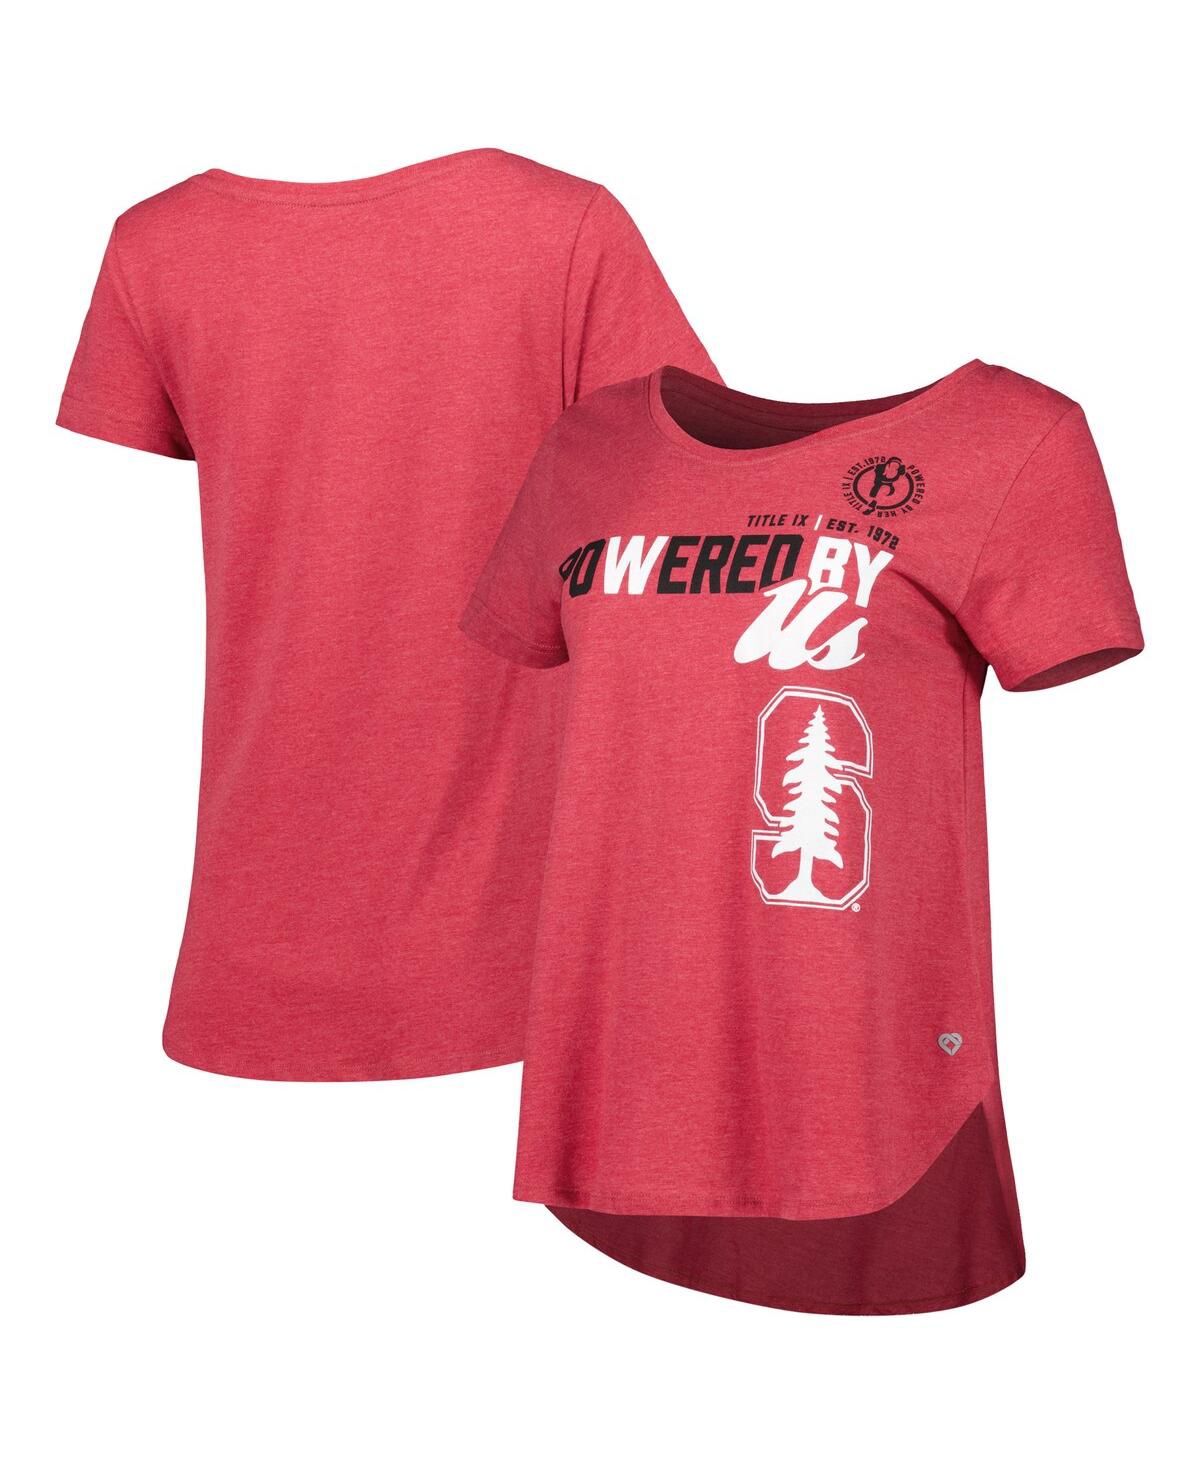 Women's Colosseum Heathered Cardinal Stanford Cardinal PoWered By Title Ix T-shirt - Heathered Cardinal